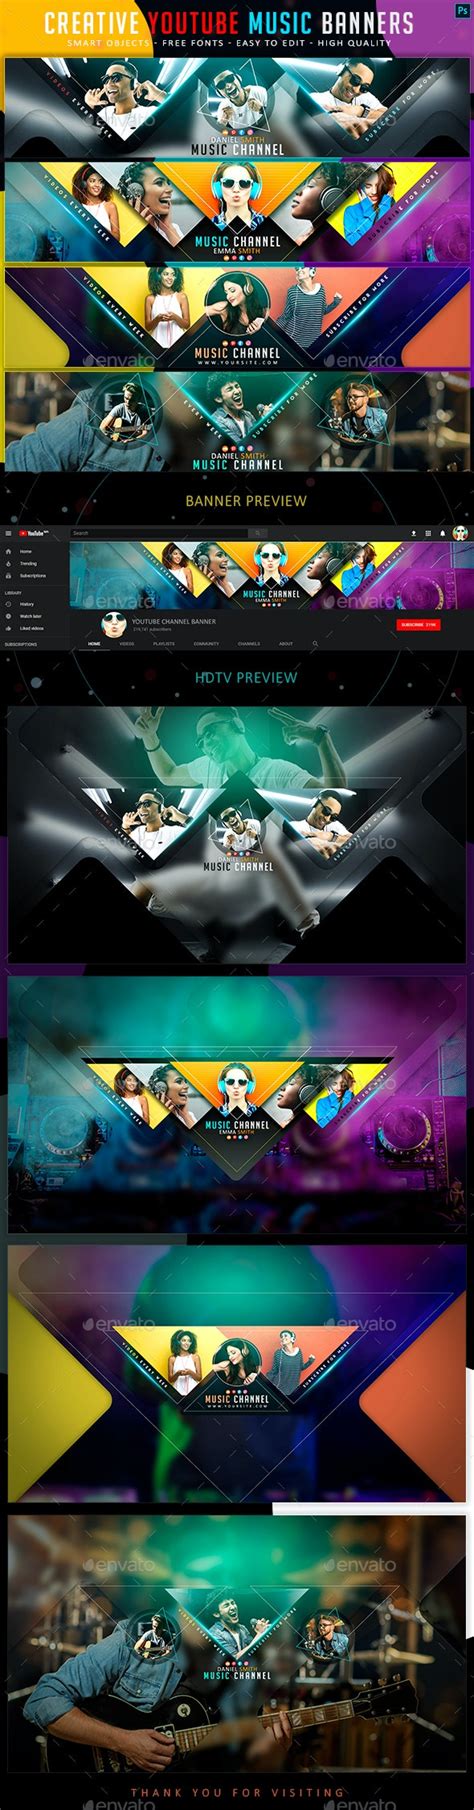 Creative Music Youtube Banners Web Elements Graphicriver